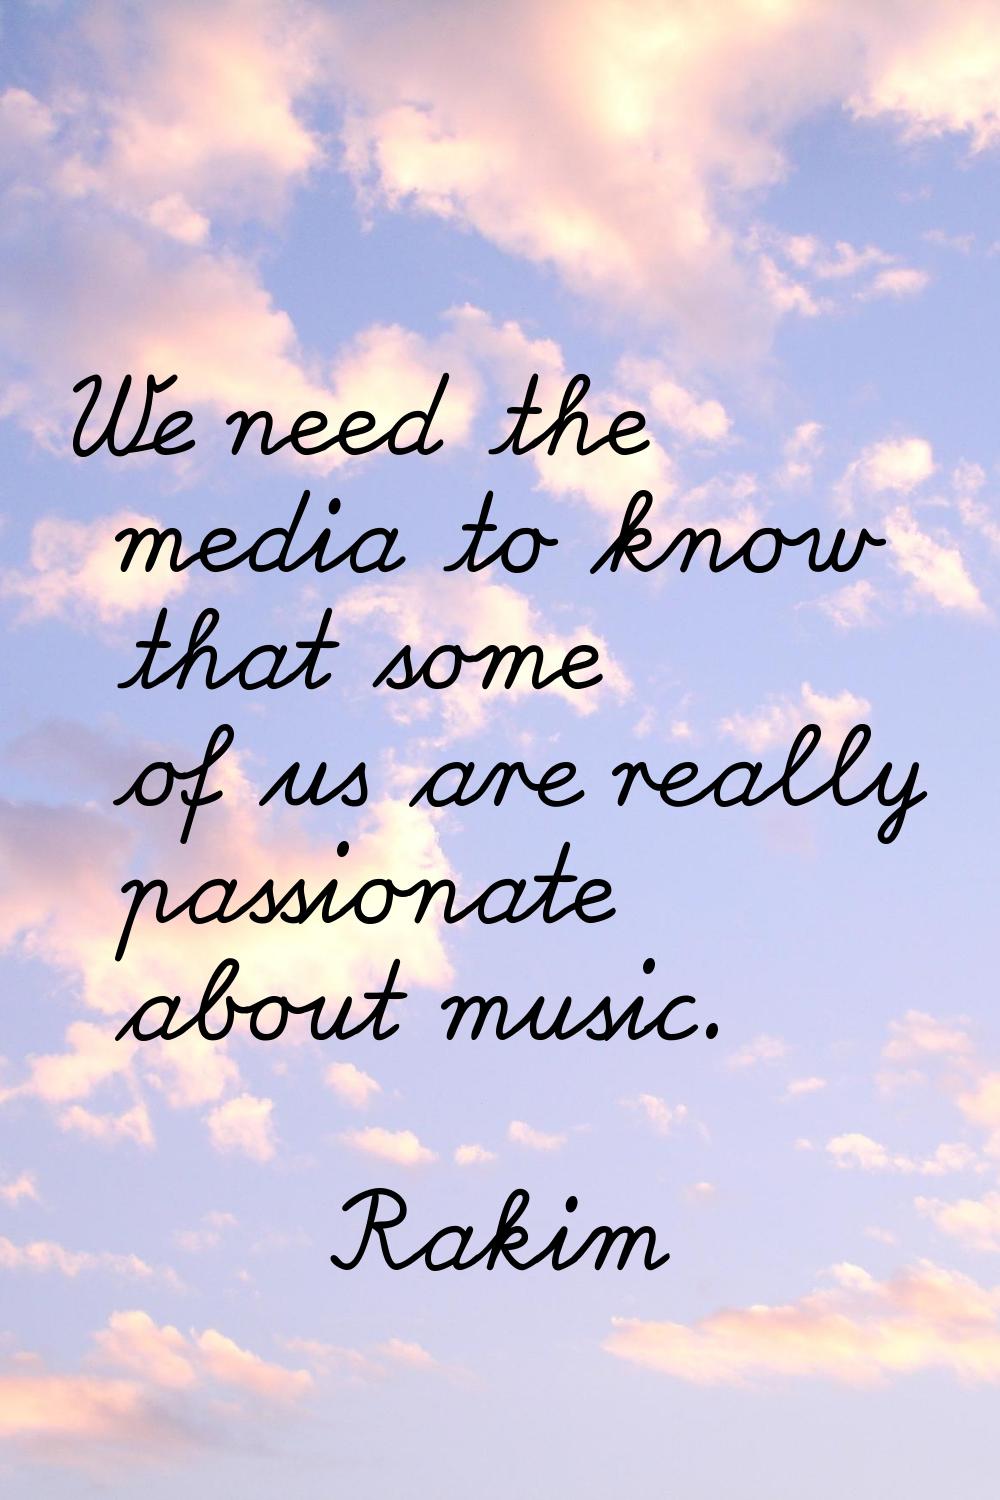 We need the media to know that some of us are really passionate about music.